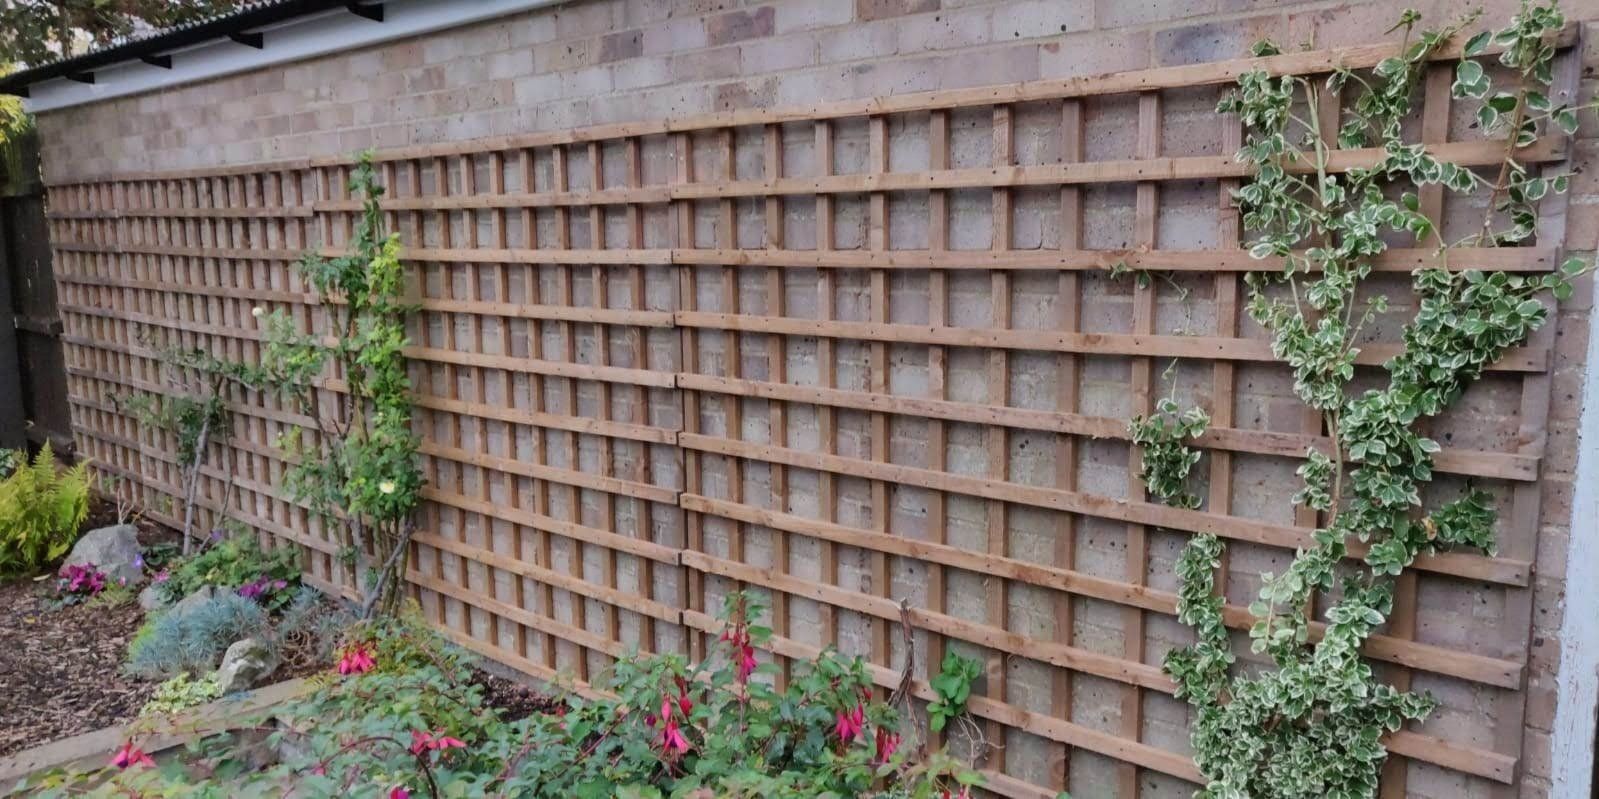 A trellis covering all of a brick wall for plants to grow up.